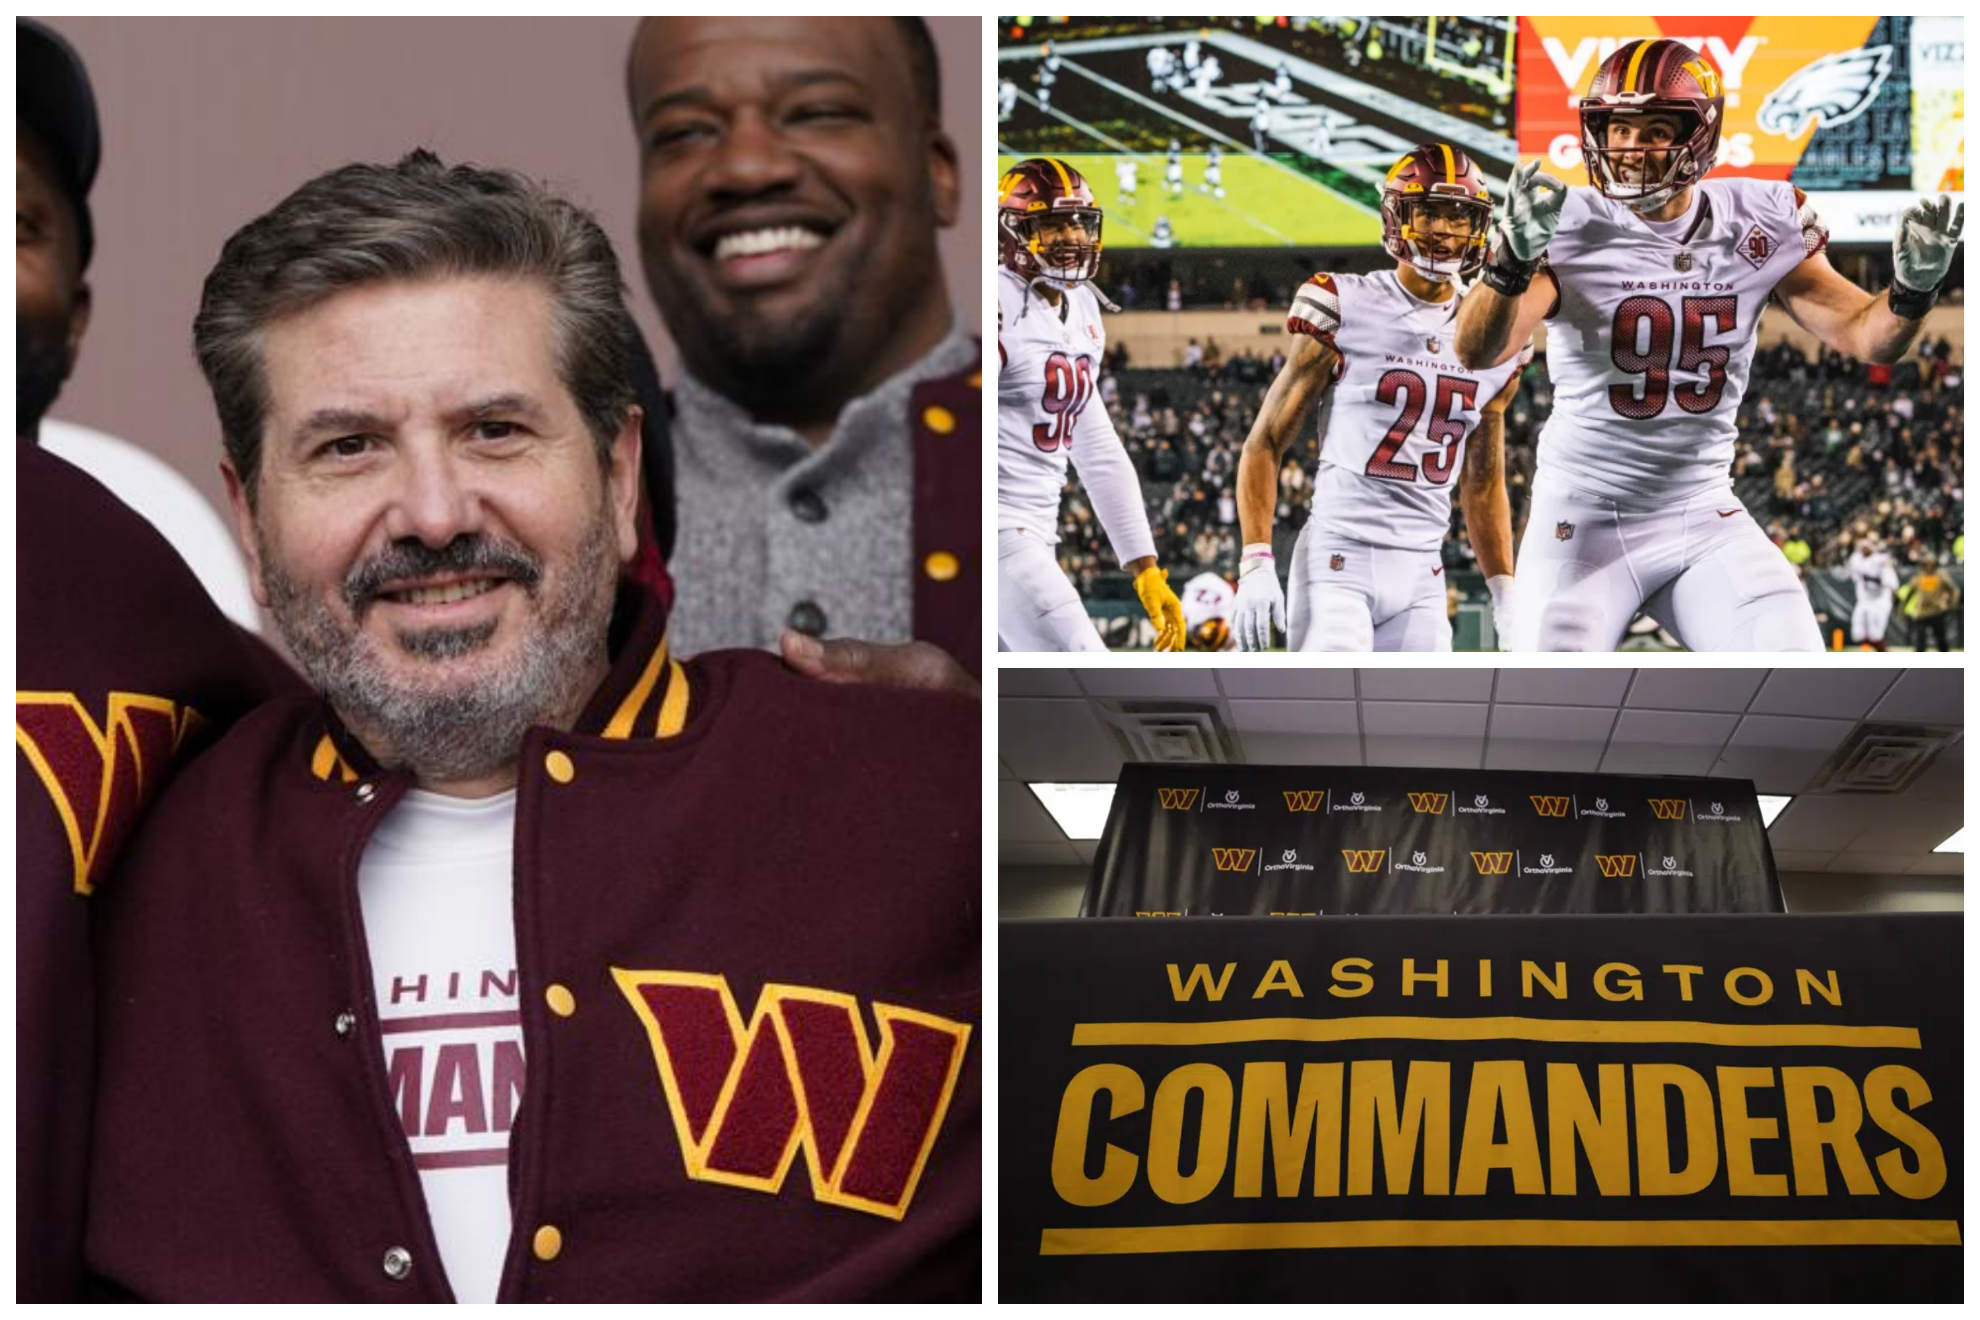 The Washington Commanders were the worst graded team by 1,300 NFL players.